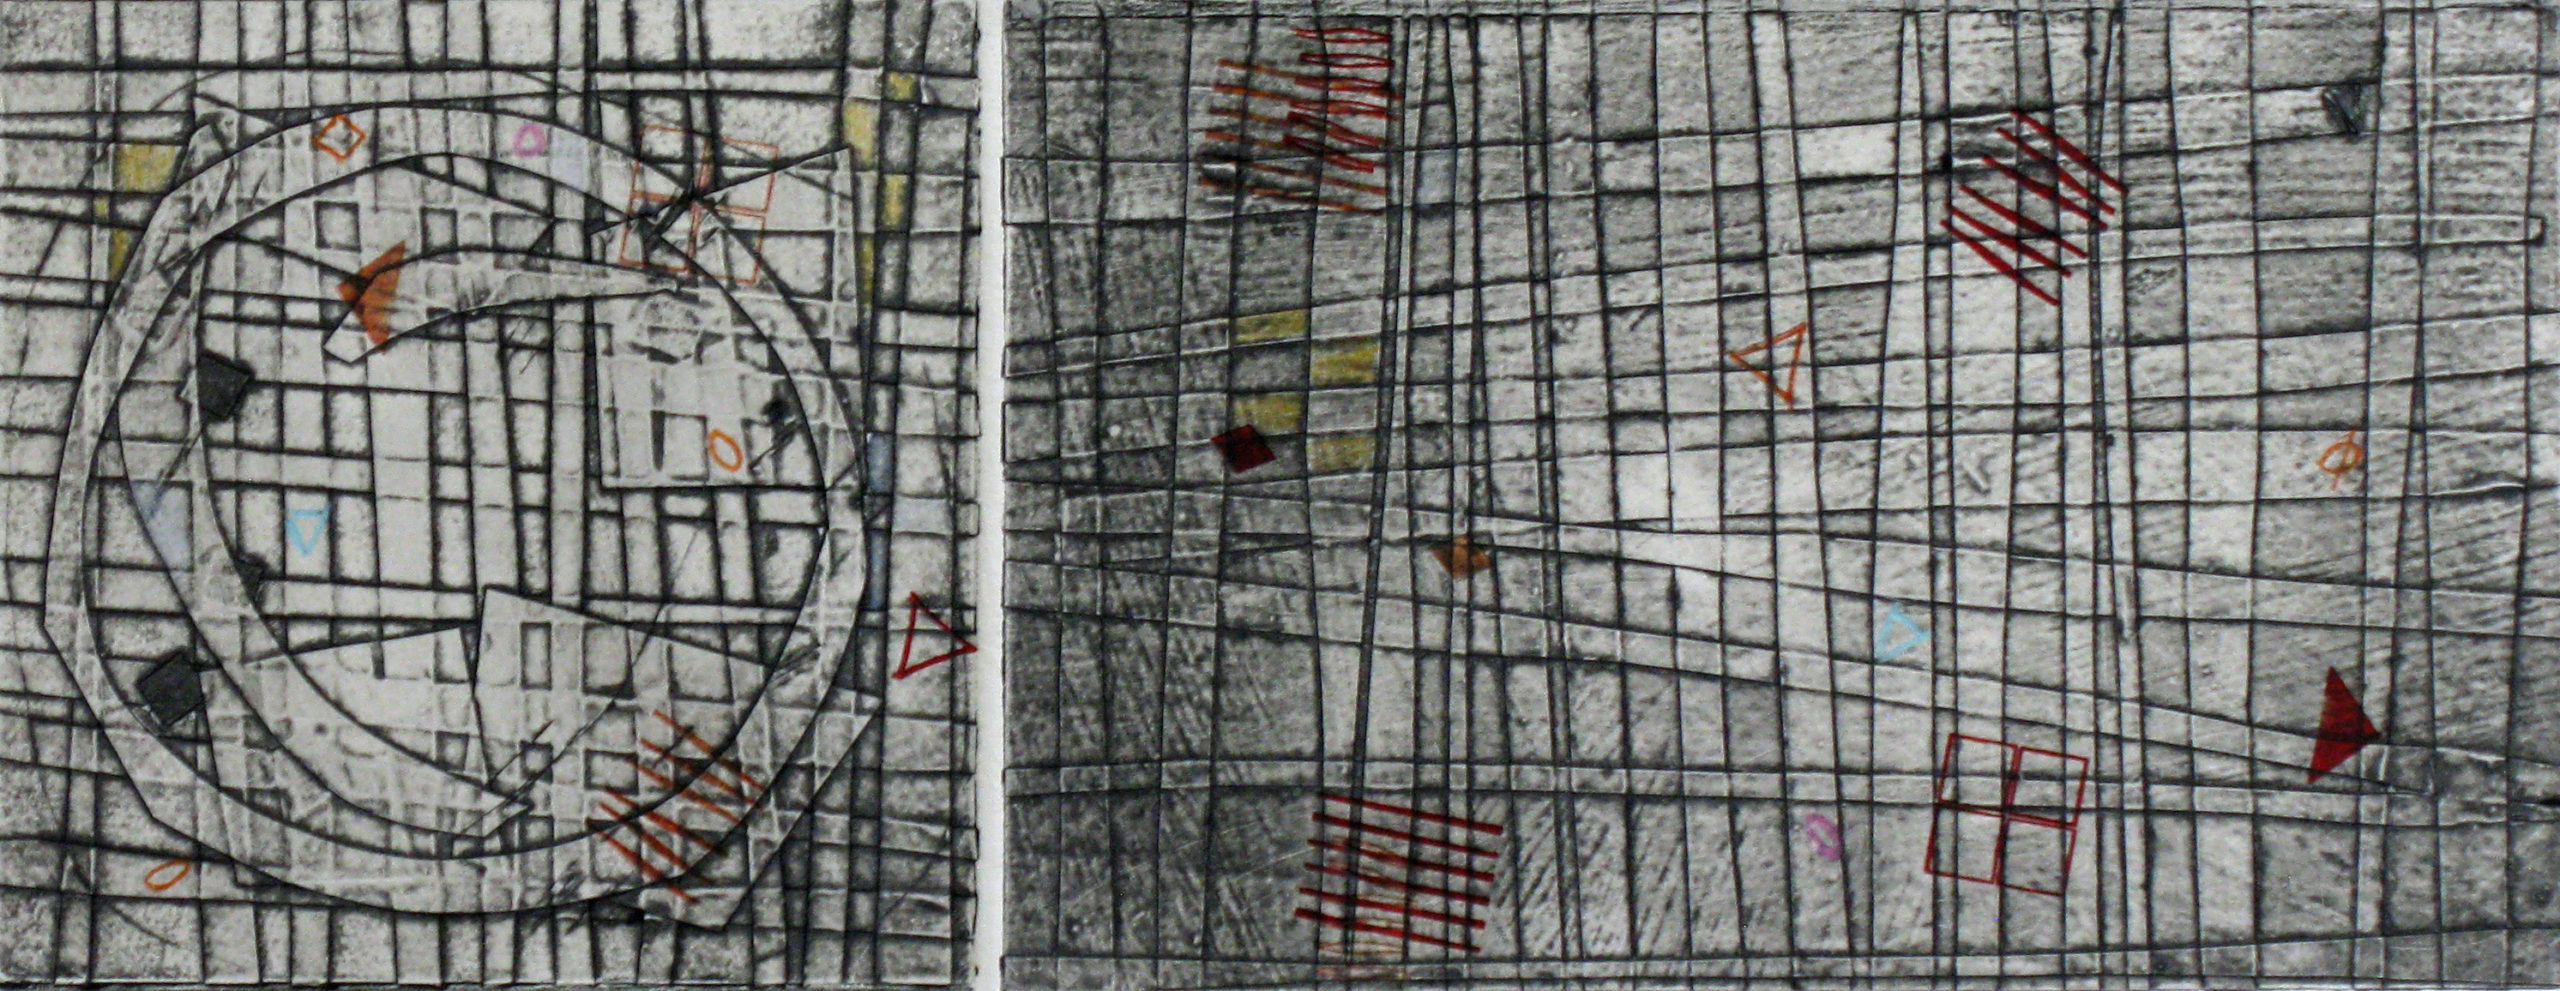 Jami Taback, Wayfinding 2, Collagraph Print Diptych with Letterpress on Handmade Paper, 18 x 12 in, 2020